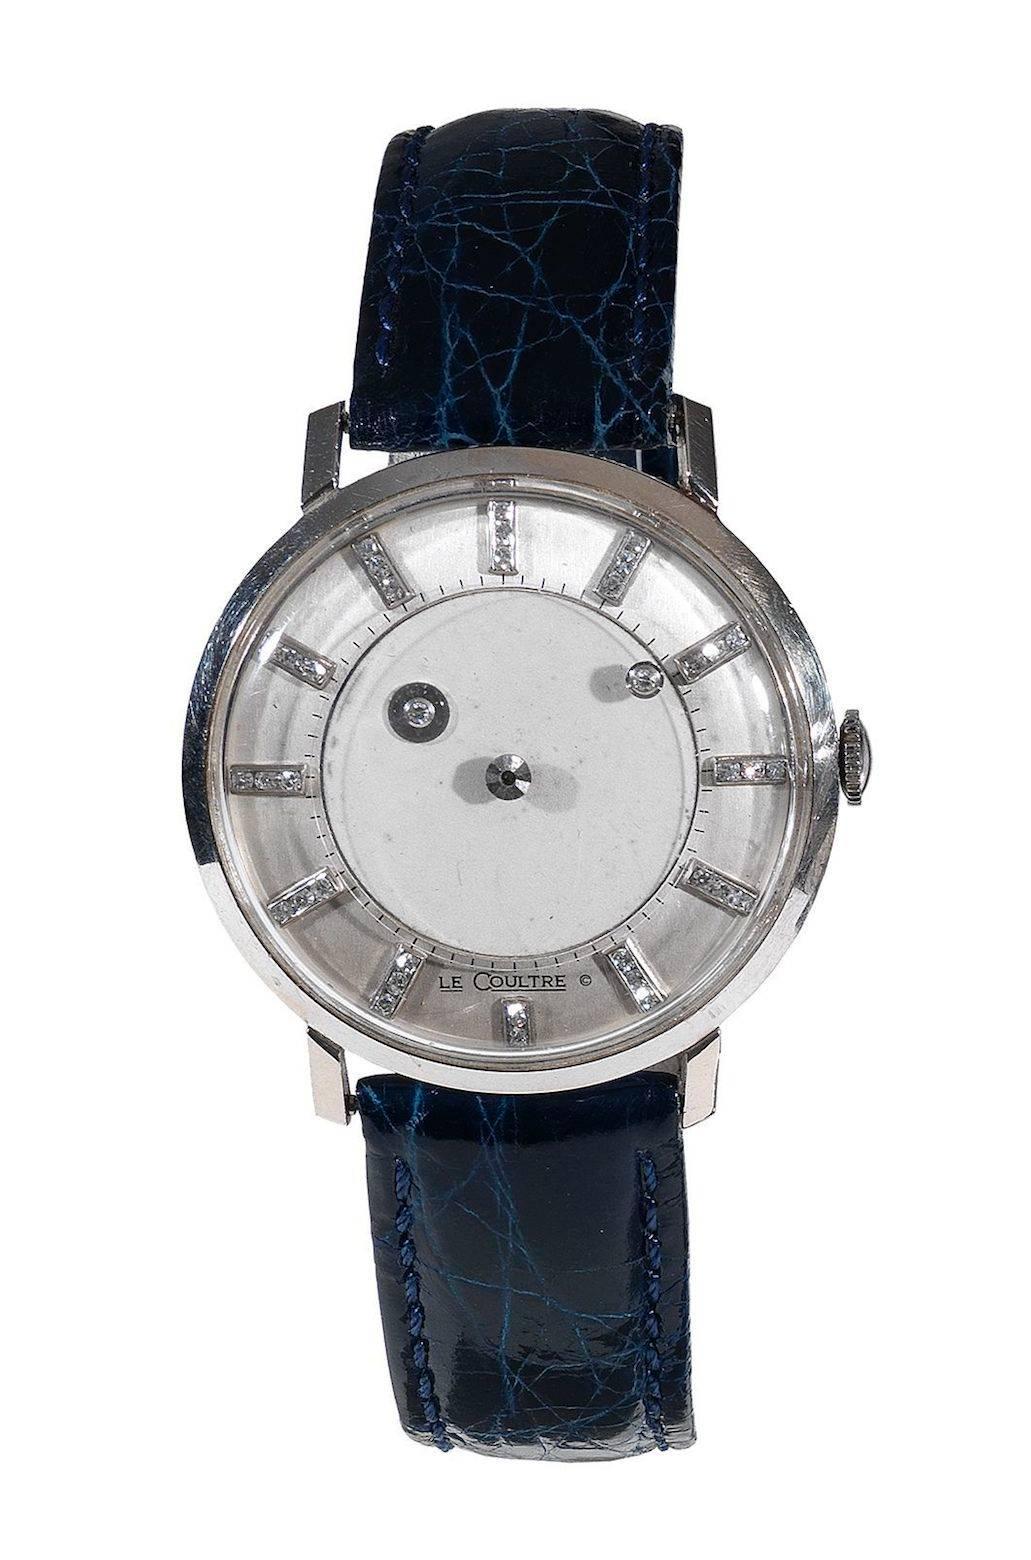 PLEASE NOTE: OUR PRICE IS FULLY INCLUSIVE OF SHIPPING, IMPORTATION TAXES & DUTIES.

Vacheron & Constantin-LeCoultre 14k White Gold Mystery Wristwatch, diamond-set indexes, manual-wind movement, circa 1950.

17-jewelmovement, white dial, inner